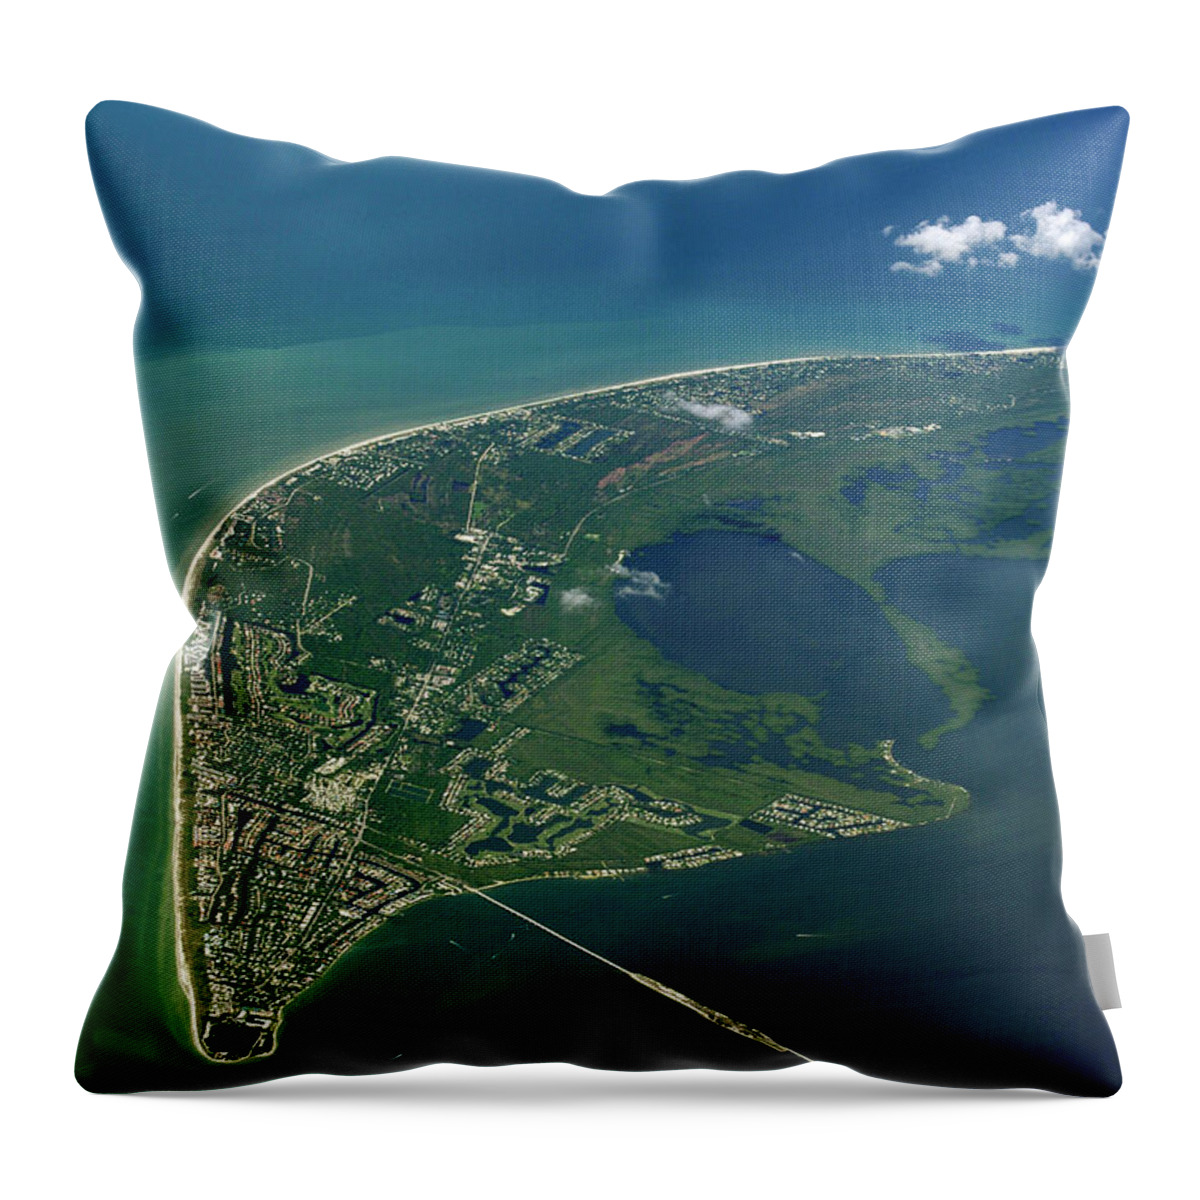 Scenic Tours Throw Pillow featuring the photograph Sanibel Island, Fl by Skip Willits